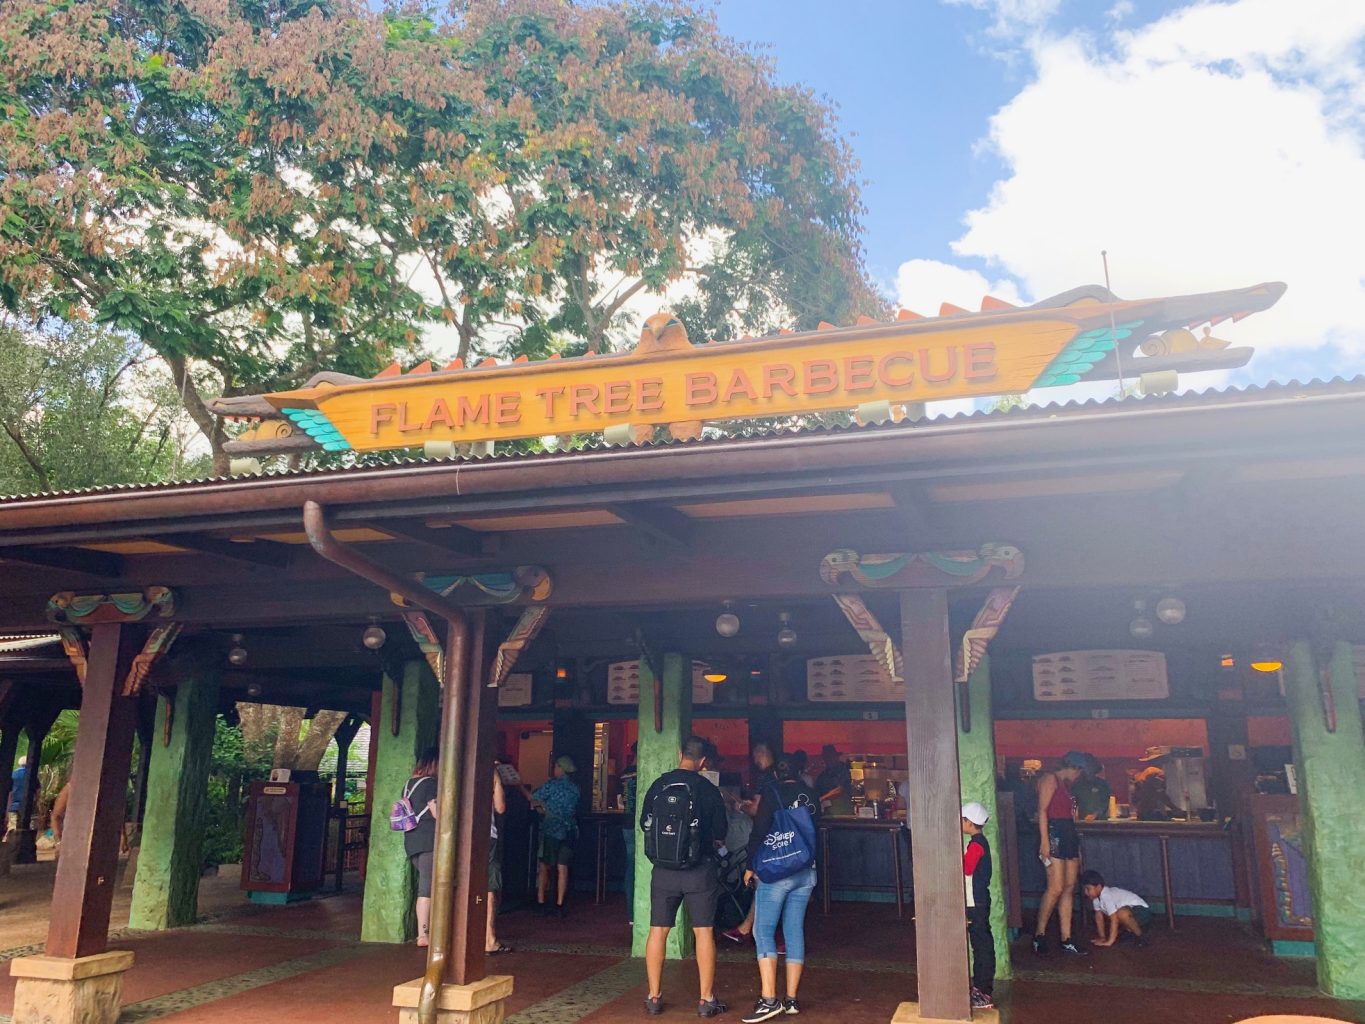 The outdoor ordering area of Palm Tree Barbecue features a  bright orange sign, and is one of the best Animal Kingdom restaurants for BBQ and quick service!